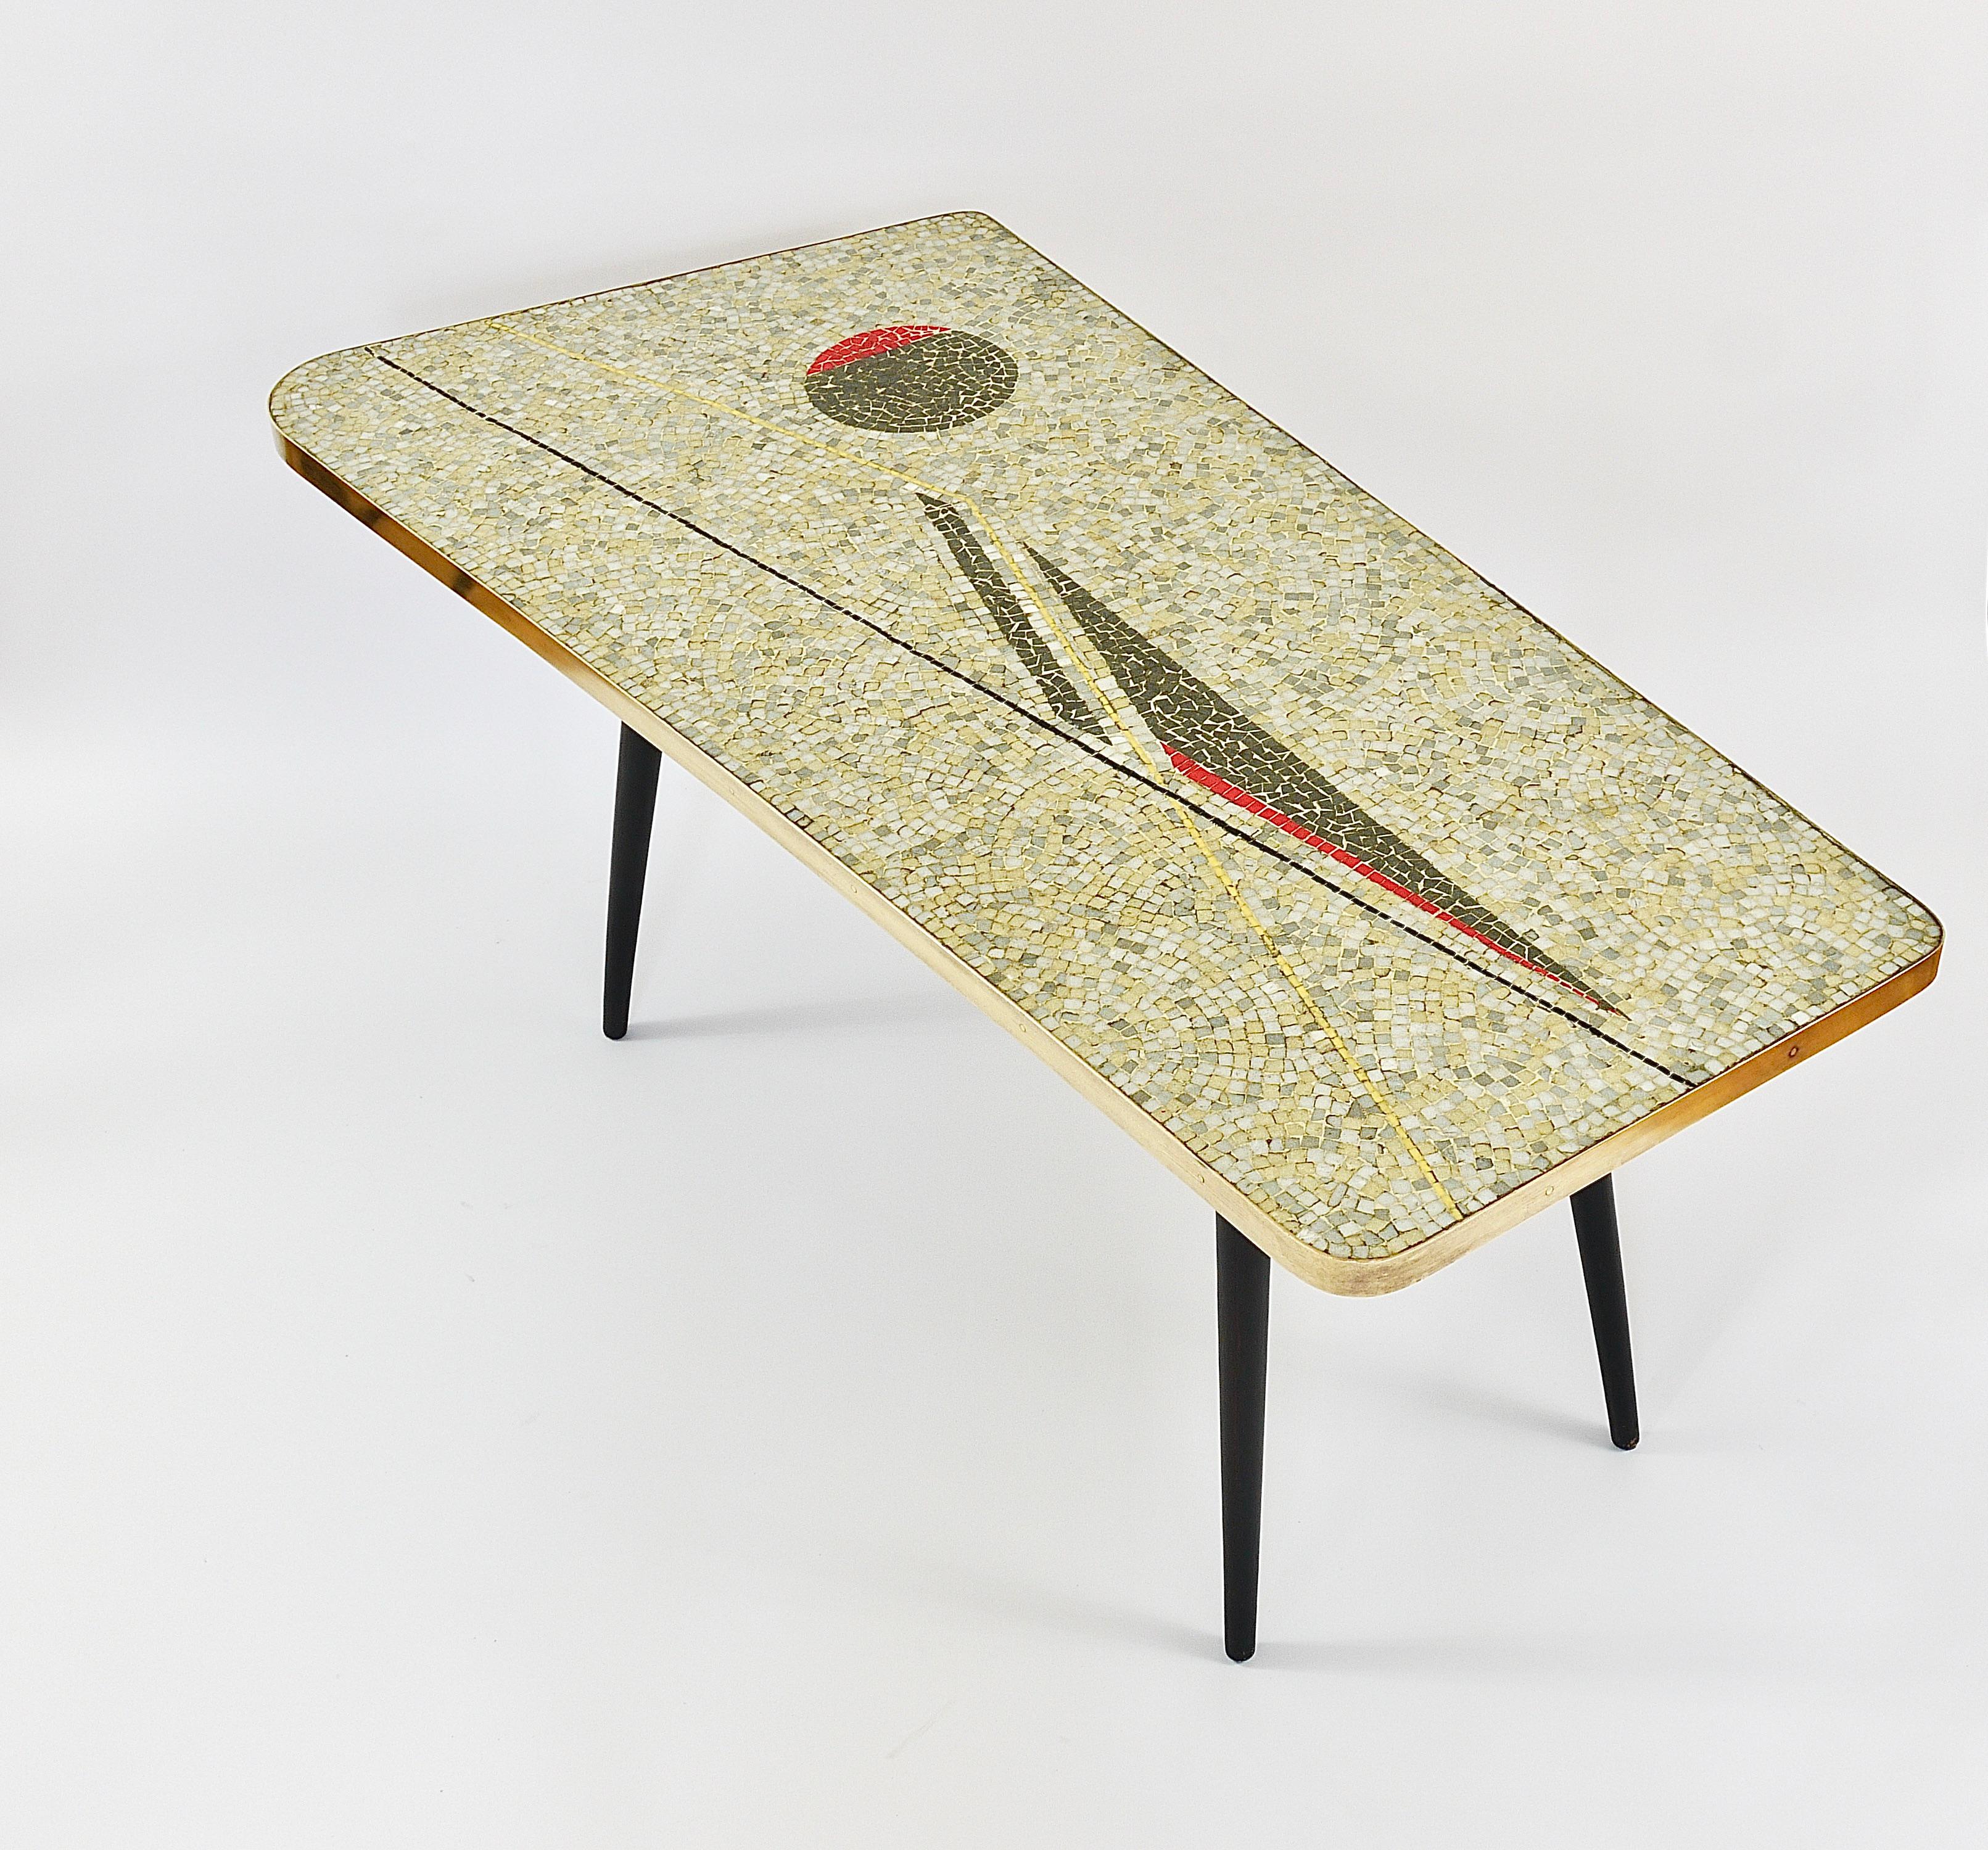 Berthold Muller Asymmetrical Mosaic Tile Coffee or Sofa Table, Germany, 1950s For Sale 5